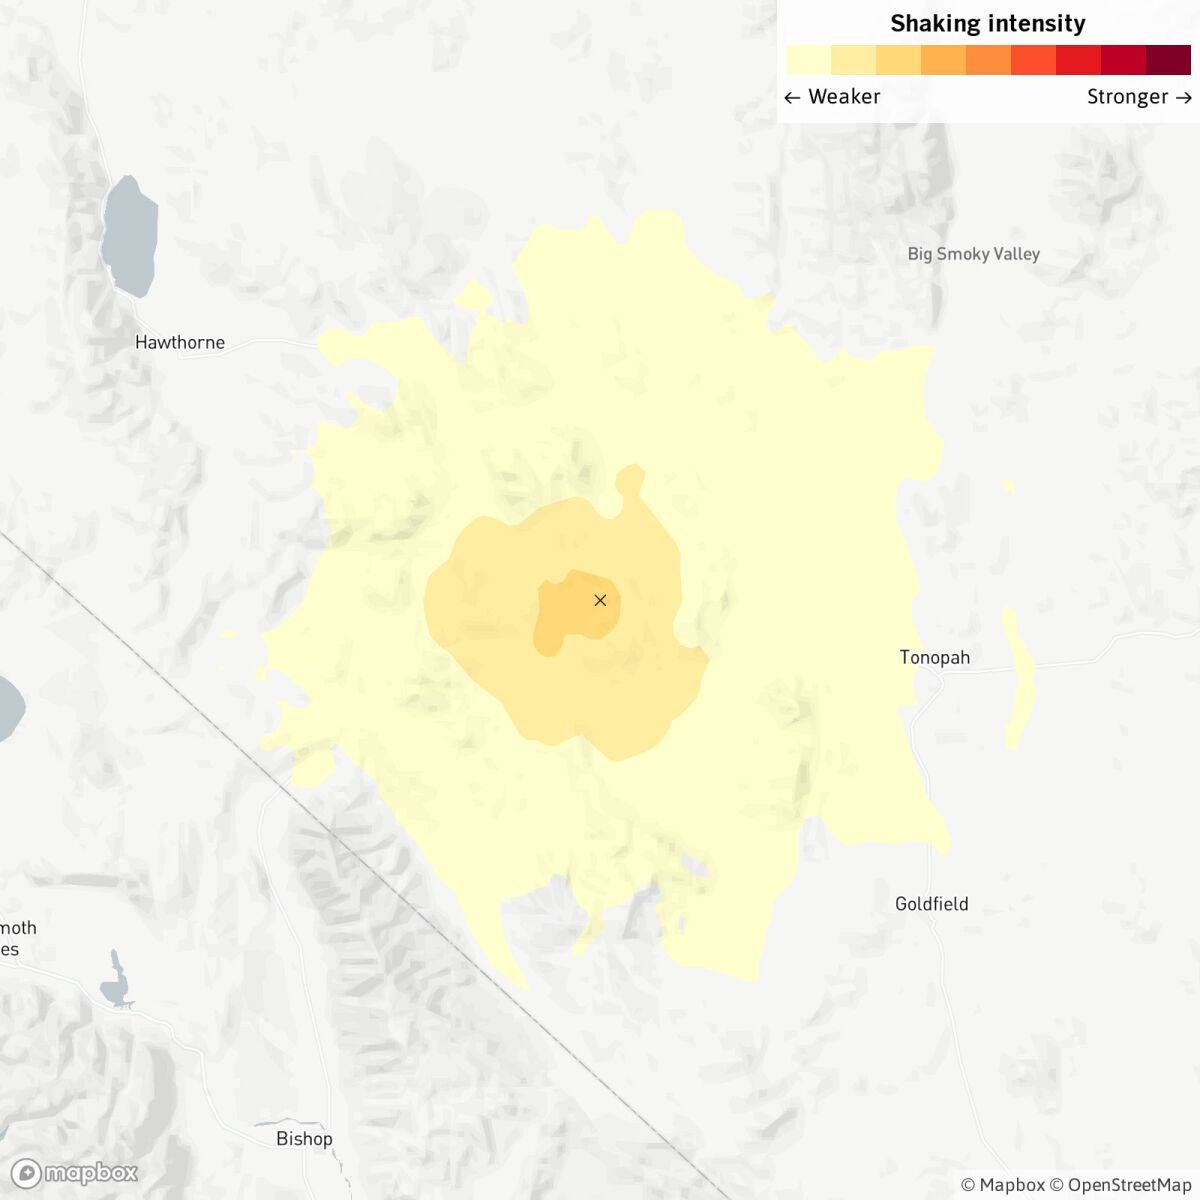 Friday morning's earthquake struck 111 miles from Carson City, Nev.